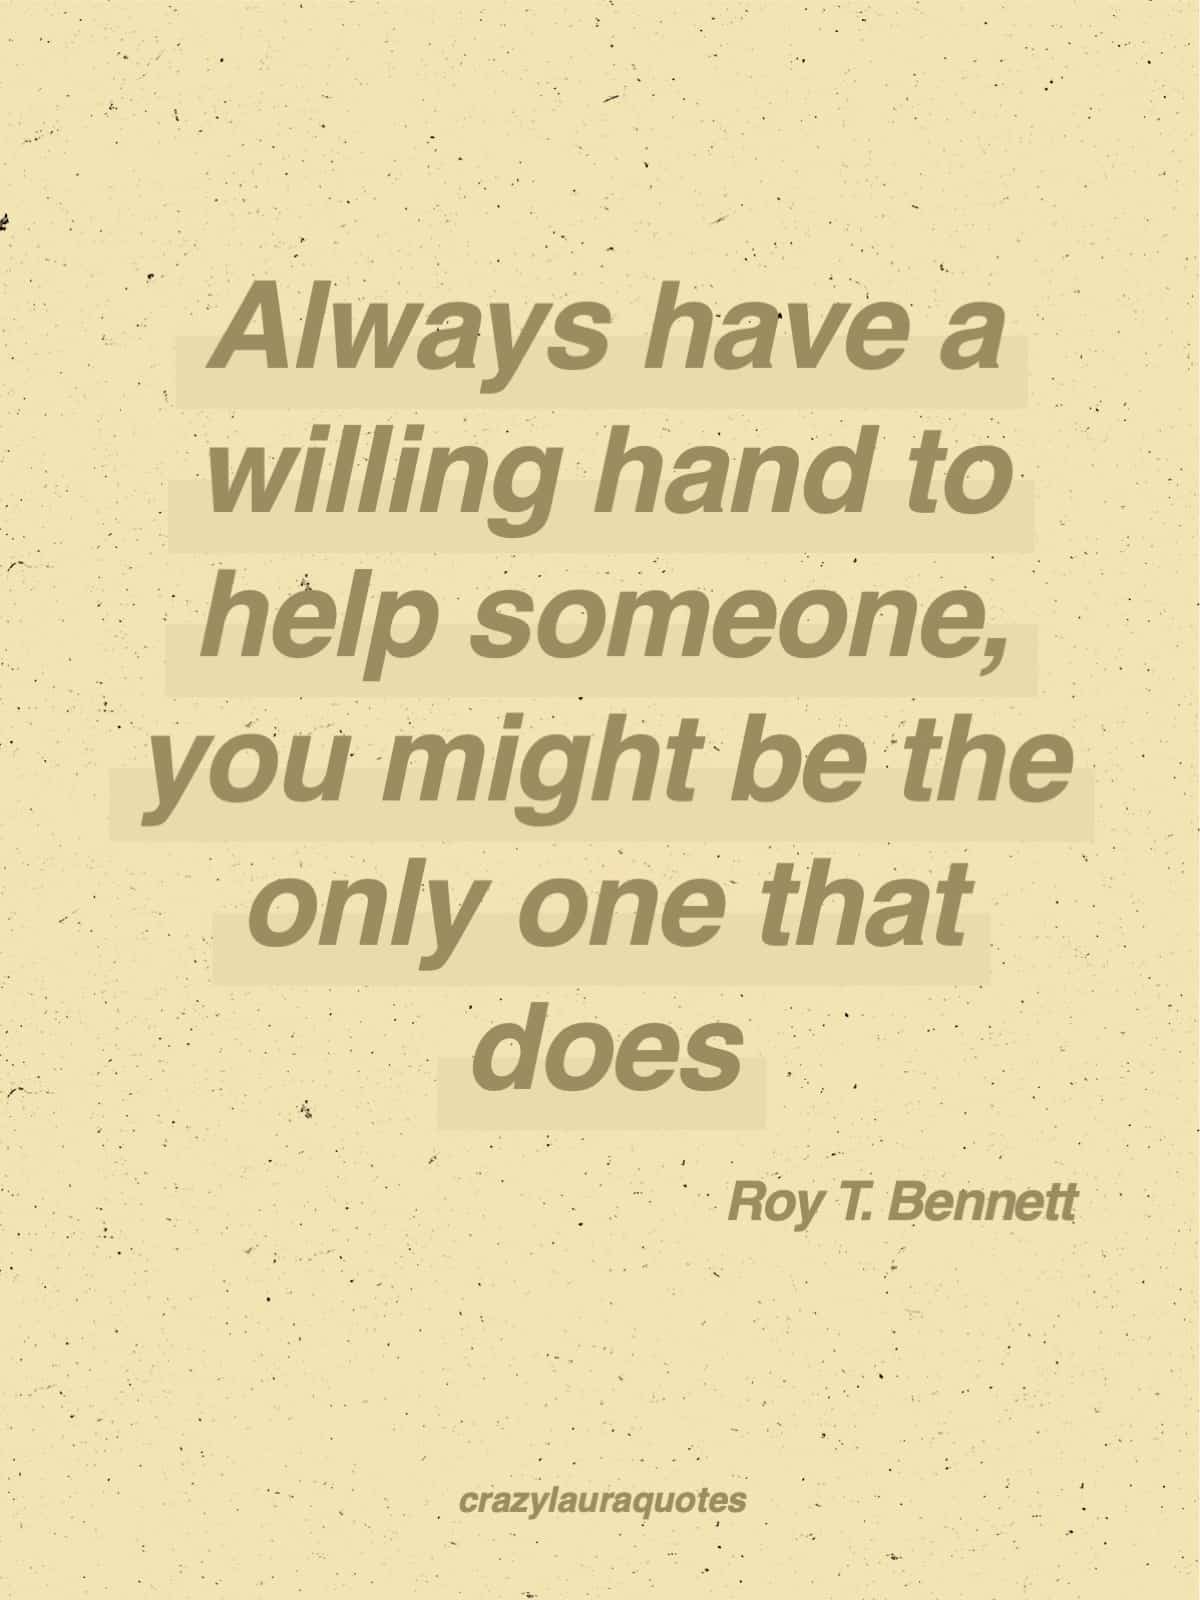 lend a hand to someone life saying